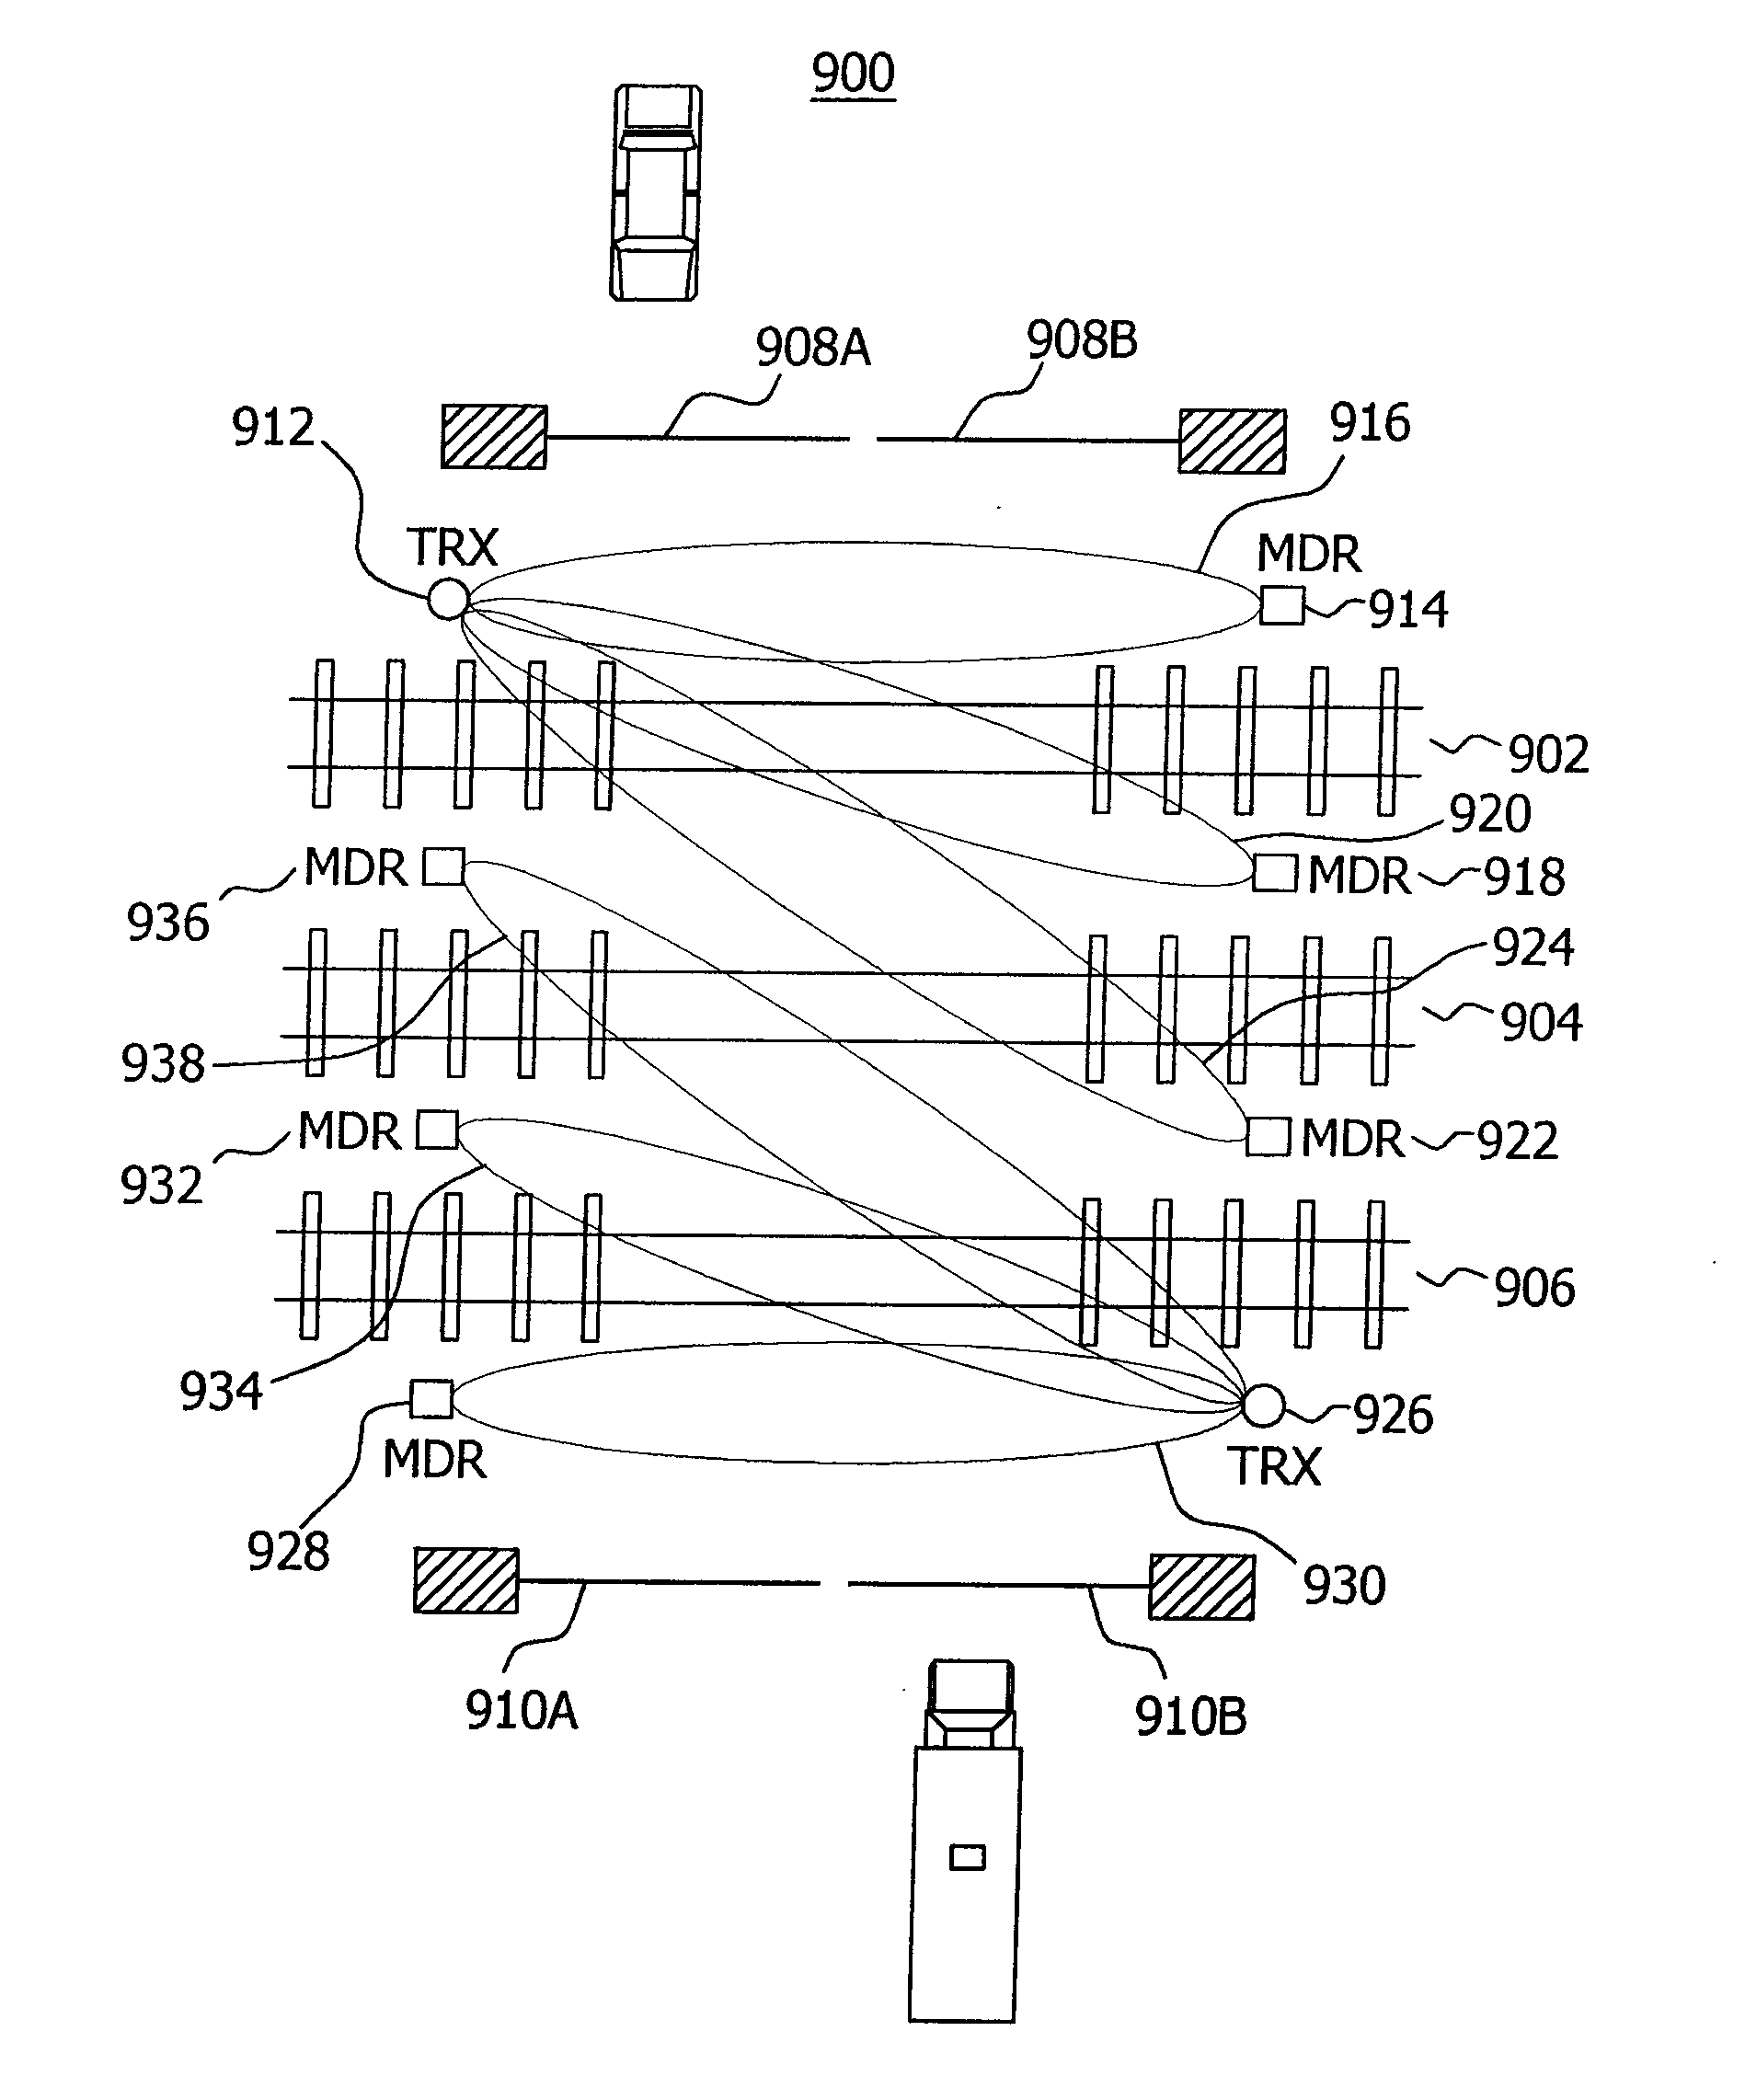 Microwave detection system and method for detecting intrusion to an off-limits zone